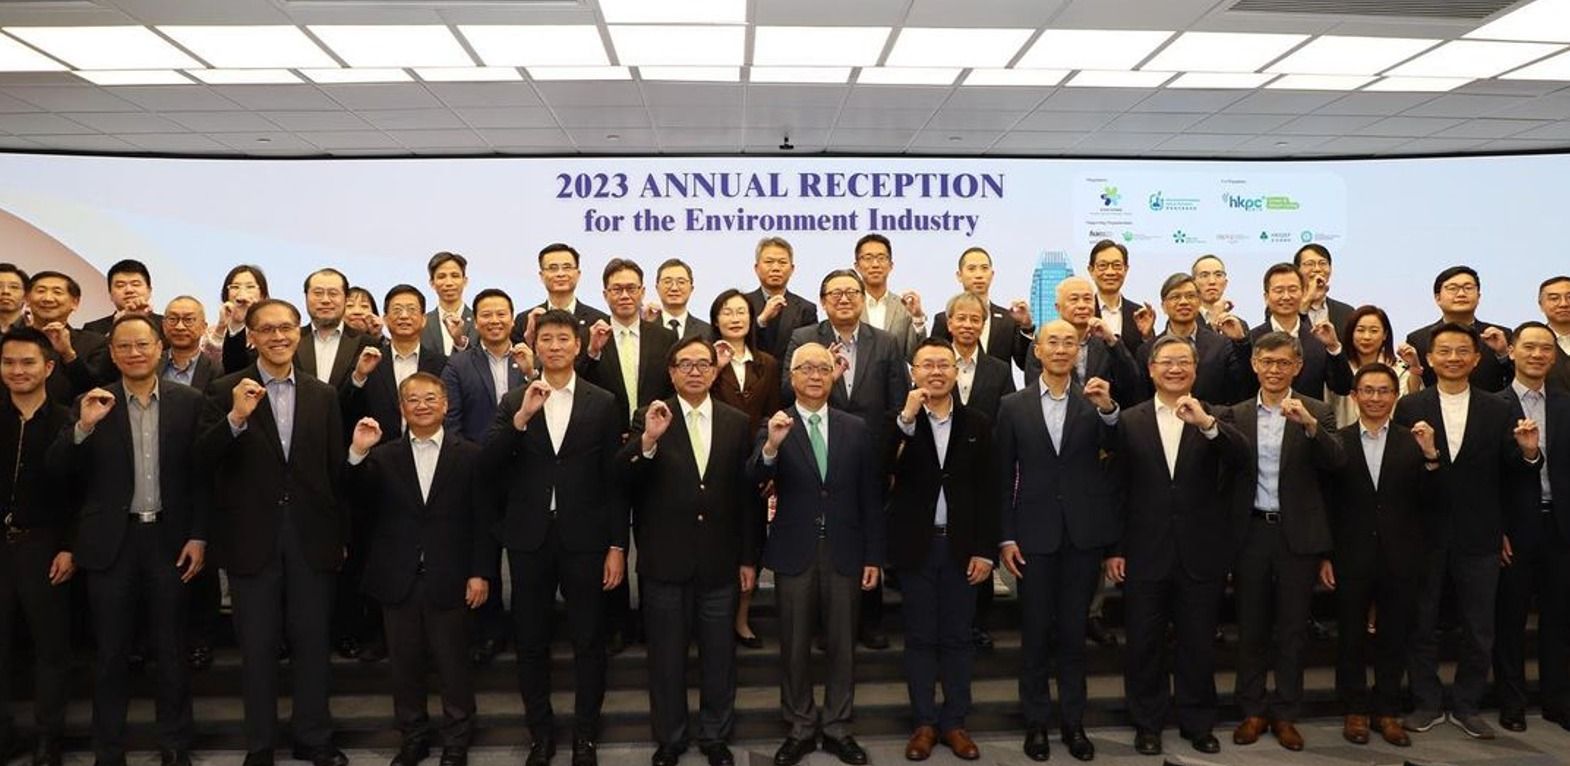 2023 Annual Reception for the Environmental Industry